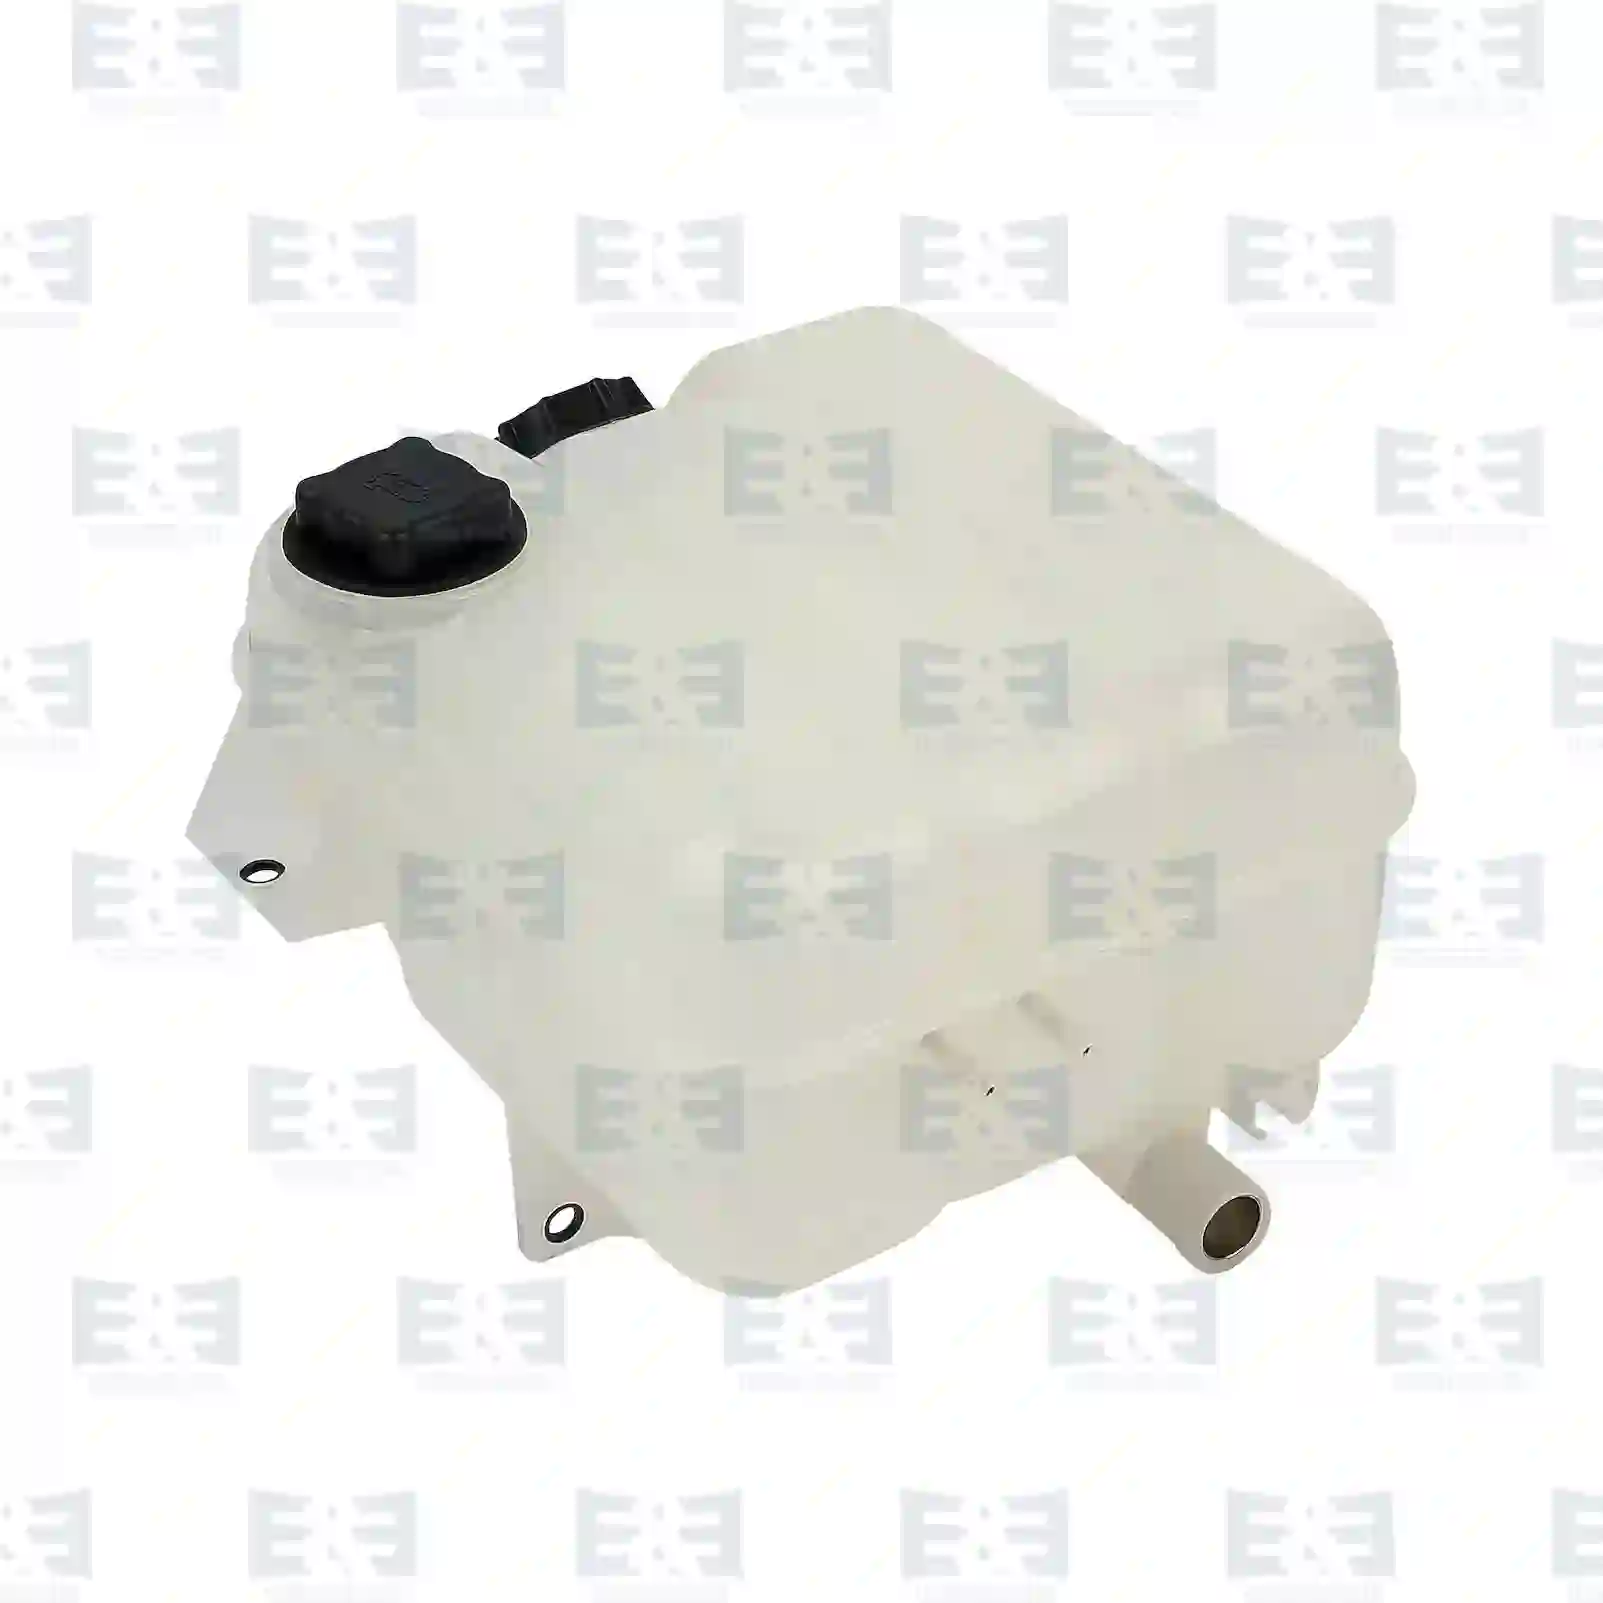 Expansion tank, with cover, without sensor, 2E2201826, 7401676400, 7401676576, 1676400, 1676576, ZG00368-0008 ||  2E2201826 E&E Truck Spare Parts | Truck Spare Parts, Auotomotive Spare Parts Expansion tank, with cover, without sensor, 2E2201826, 7401676400, 7401676576, 1676400, 1676576, ZG00368-0008 ||  2E2201826 E&E Truck Spare Parts | Truck Spare Parts, Auotomotive Spare Parts